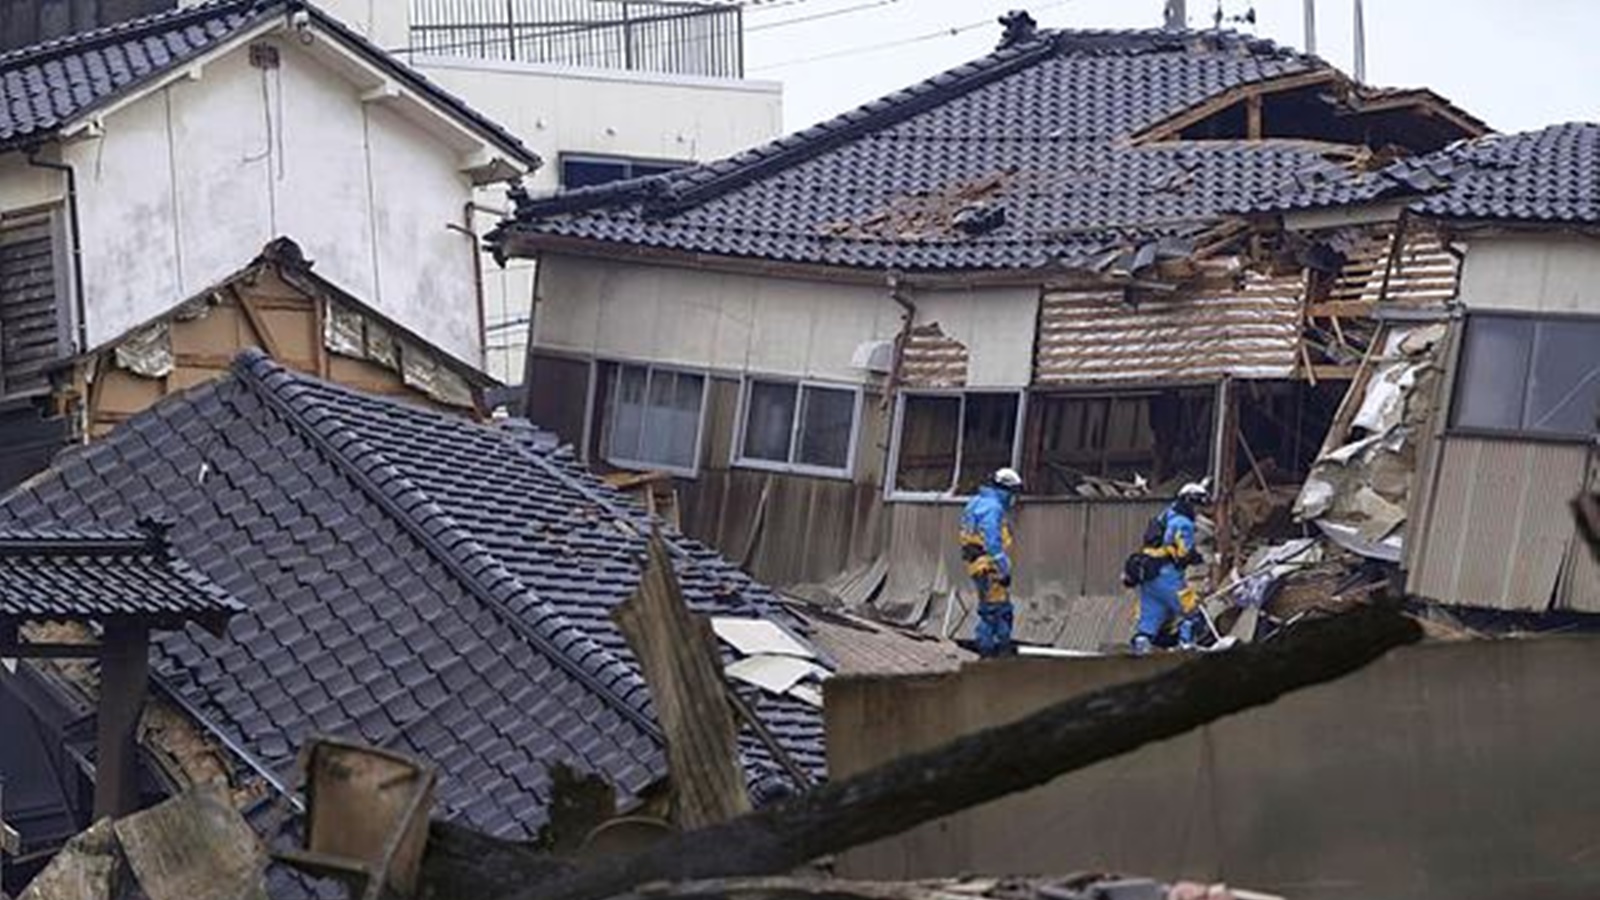 Japan earthquake deaths top 100, with hundreds missing